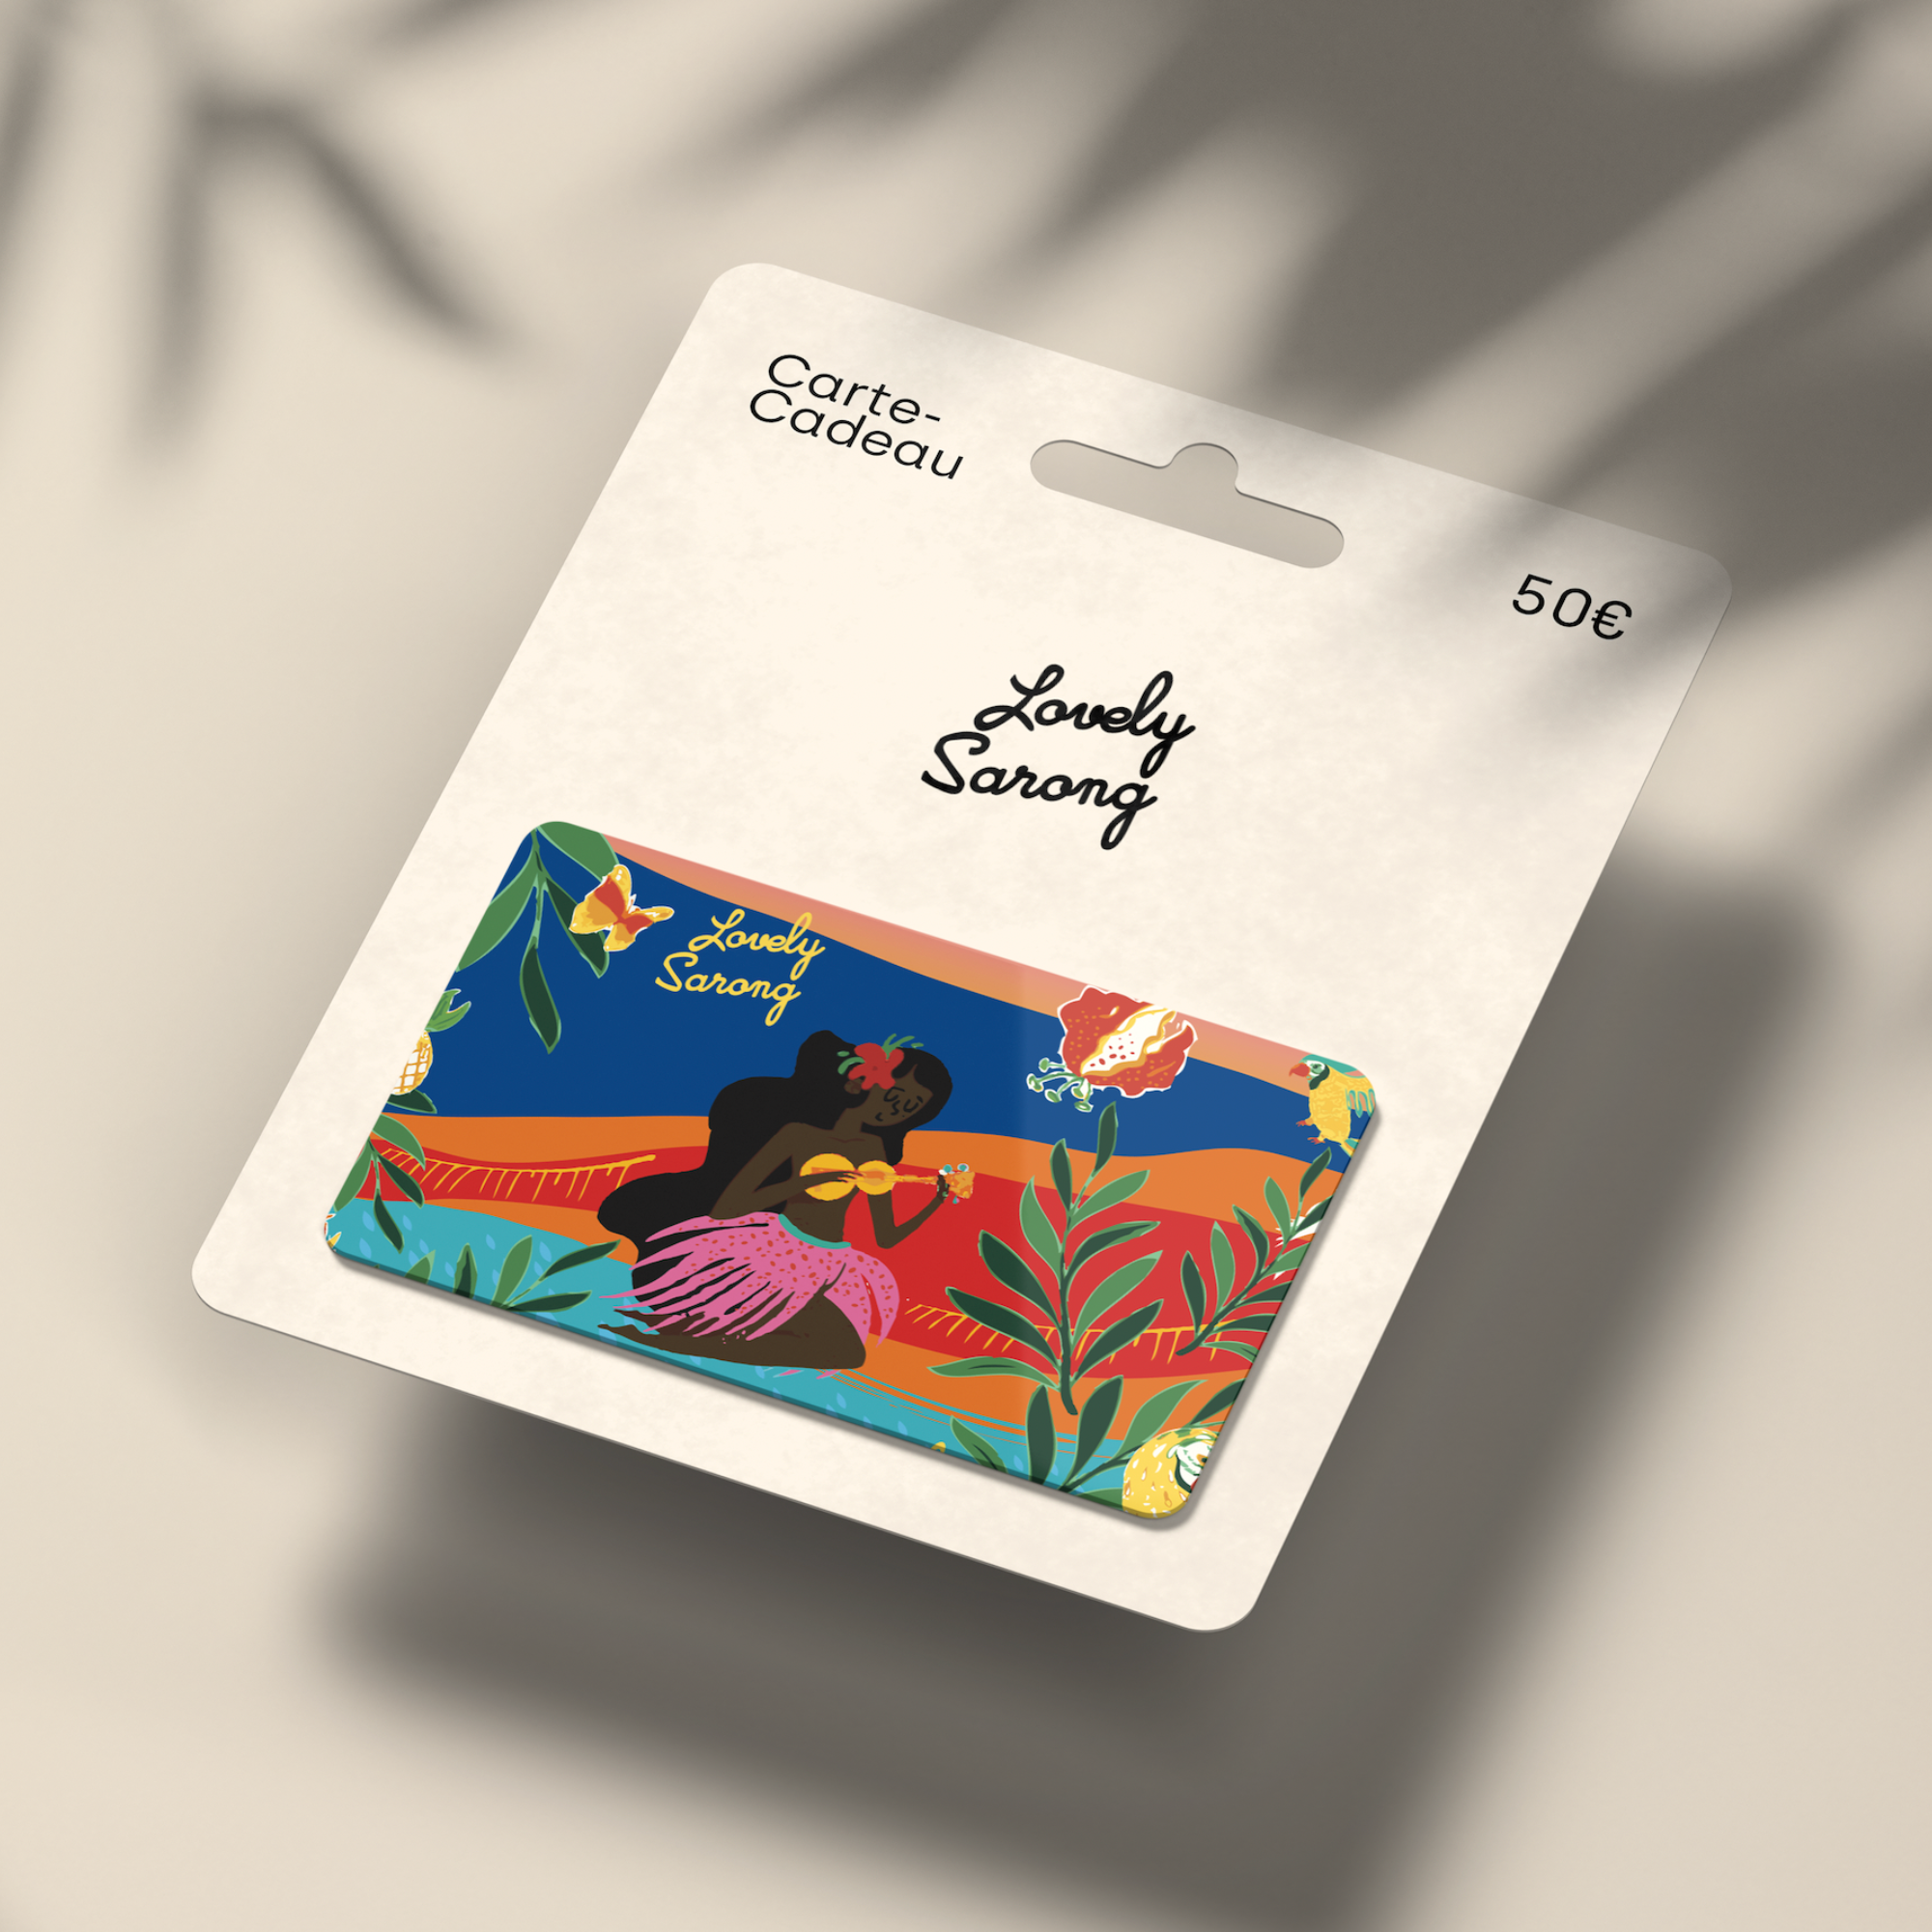 Lovely Sarong gift card - €50